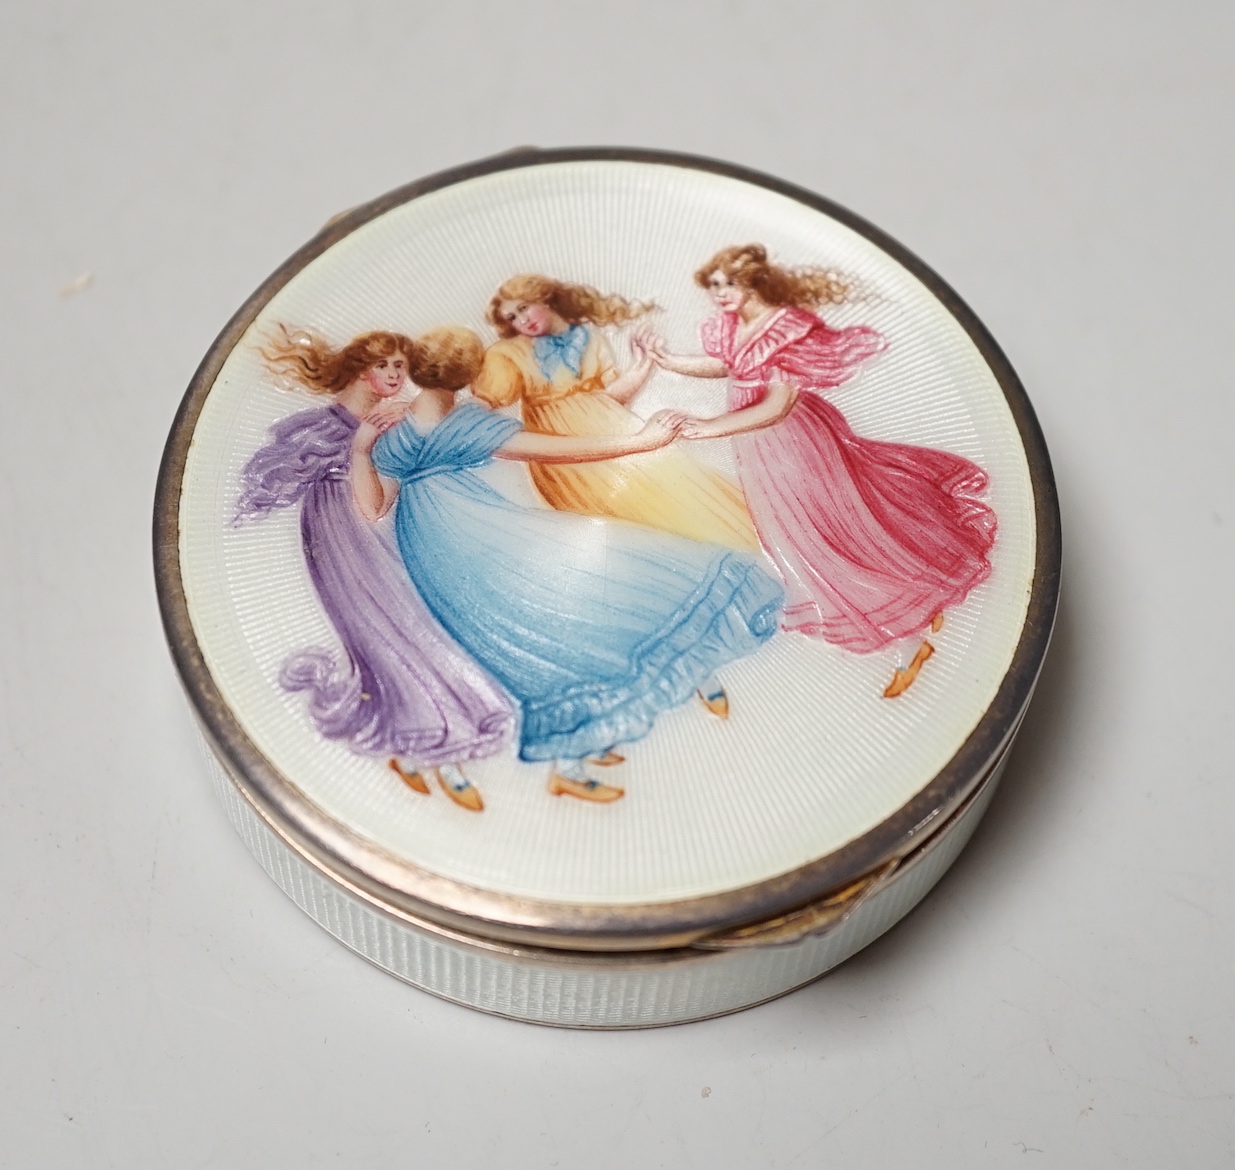 A German silver and enamel circular powder box, decorated with dancing maidens, import marks for Edinburgh, 1952?, 69mm.